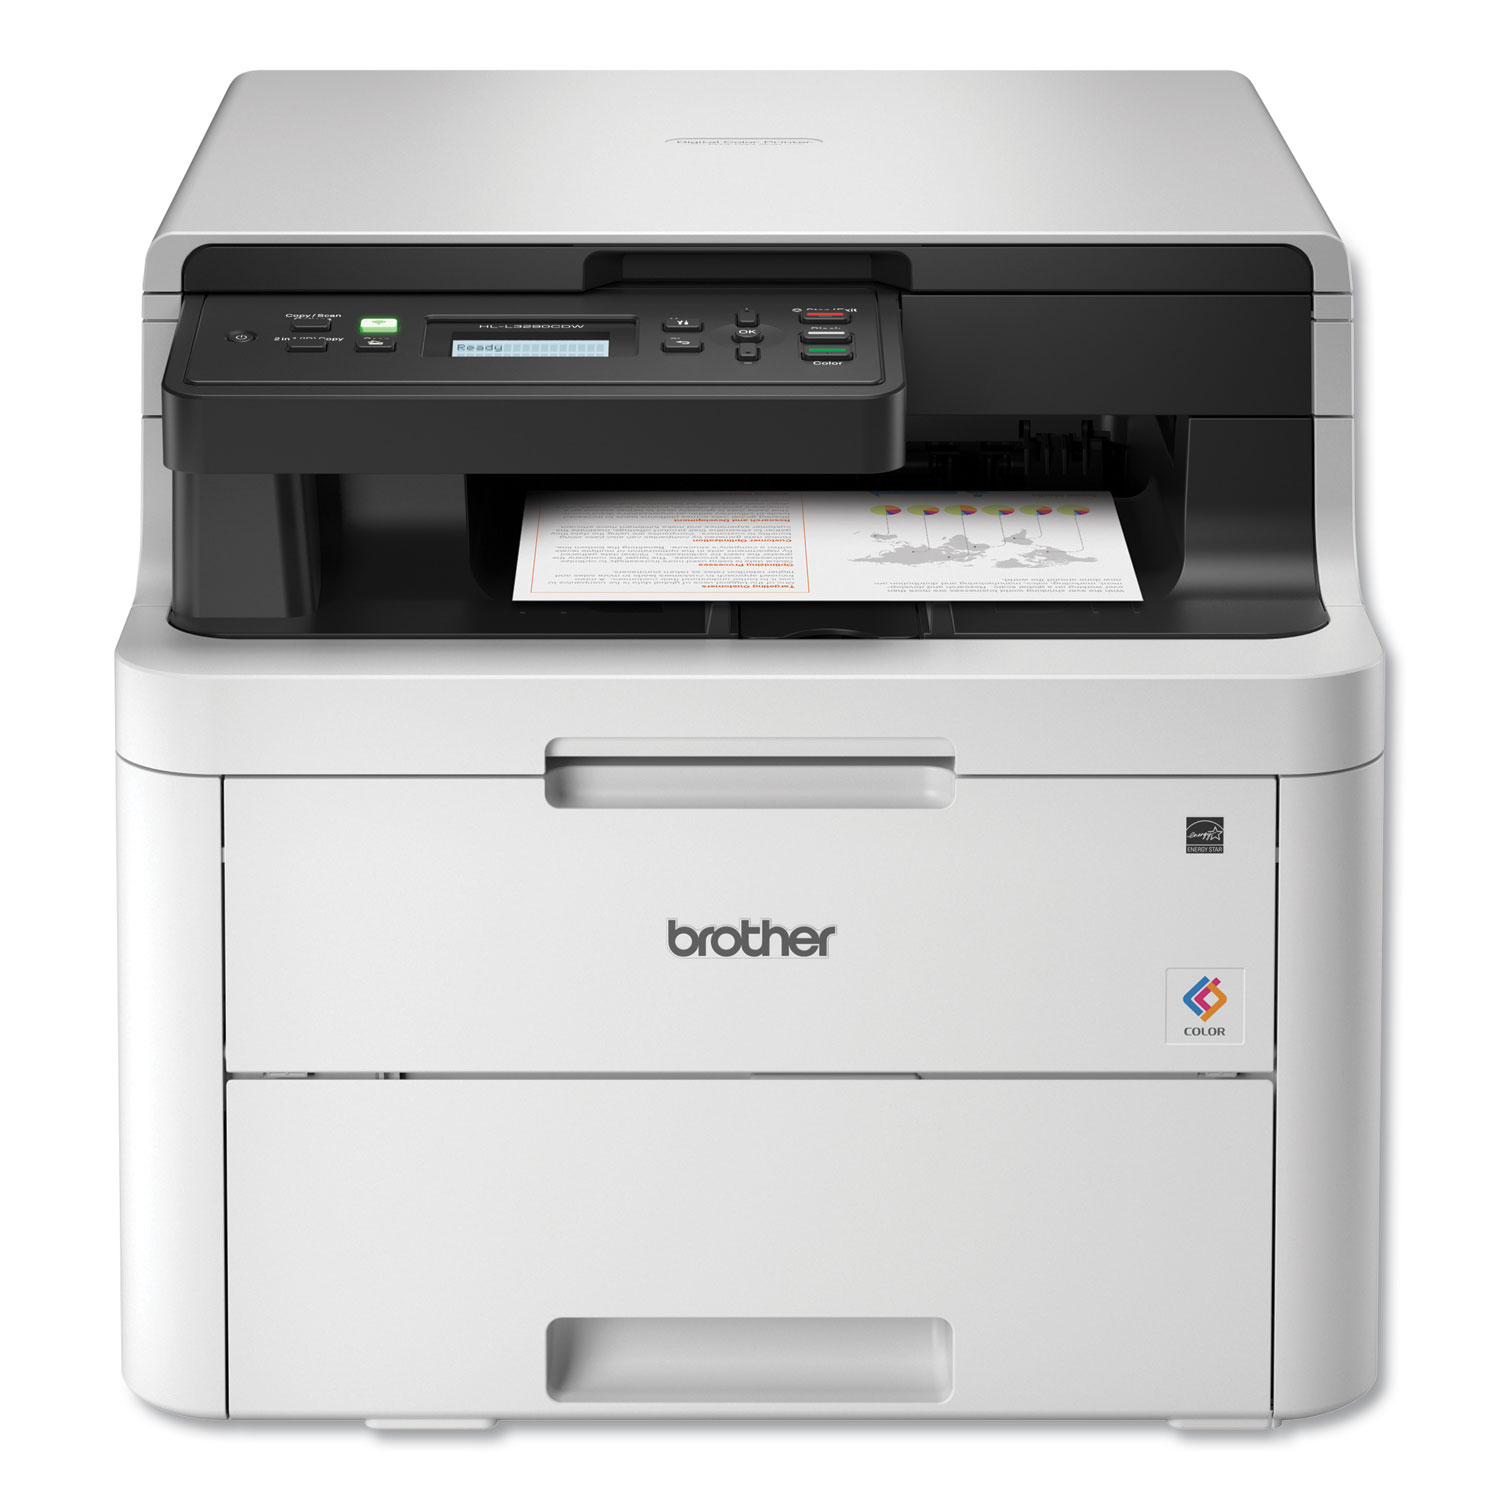  Brother HLL3290CDW HLL3290CDW Compact Digital Color Printer with Convenient Flatbed Copy and Scan, Plus Wireless and Duplex Printing (BRTHLL3290CDW) 